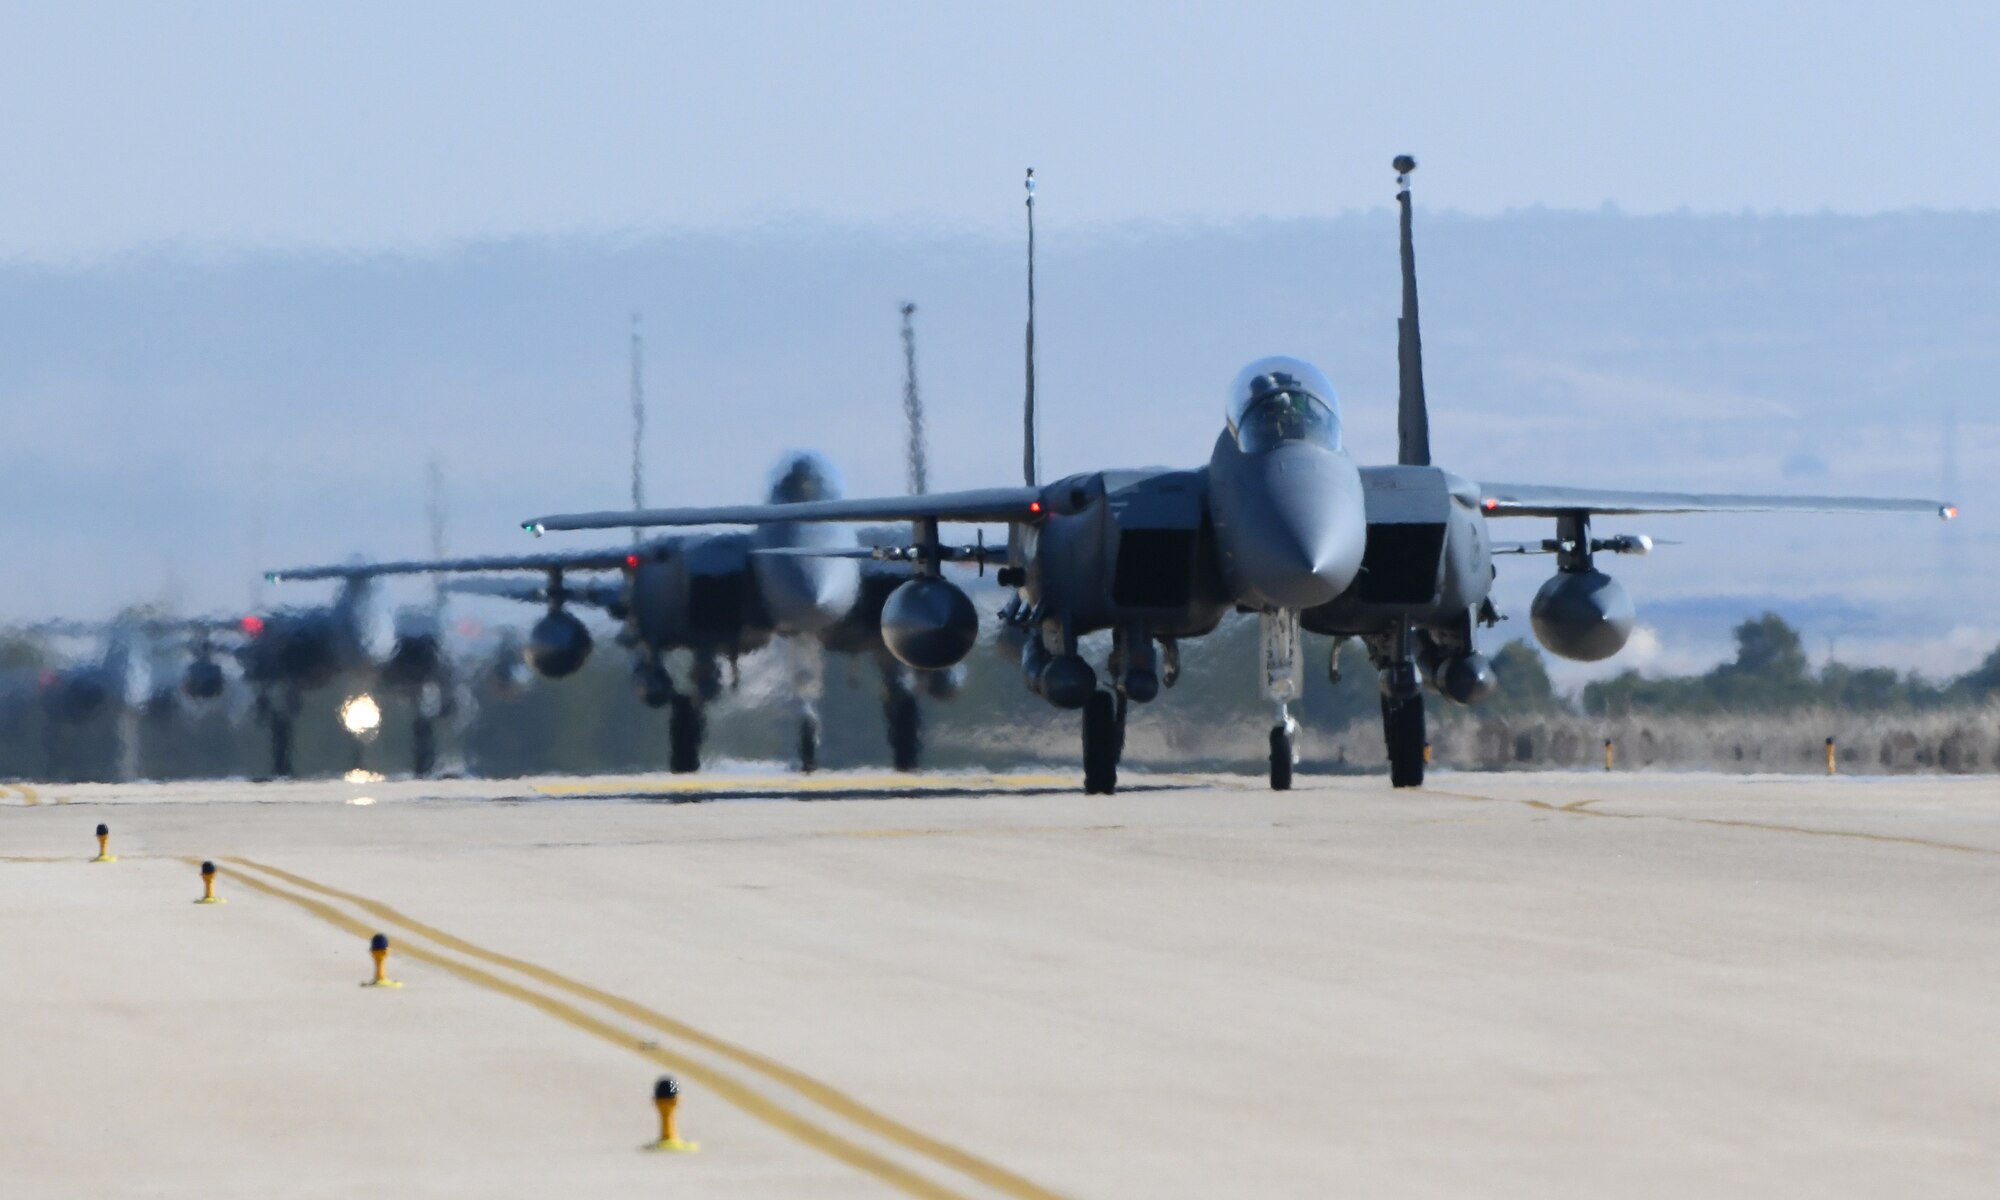 Four U.S. Air Force F-15E Strike Eagles from Royal Air Force Lakenheath, England, taxi down the flightline at Albacete Air Base, Spain, during the NATO Tactical Leadership Programme 19-1 flying course, Feb. 15, 2019. During TLP, U.S. Air Force F-15Es will conduct flying training with other NATO air forces including Spain, France, Greece, Italy, Germany, the United Kingdom and Belgium. (U.S. Air Force photo by Staff Sgt. Alex Fox Echols III)